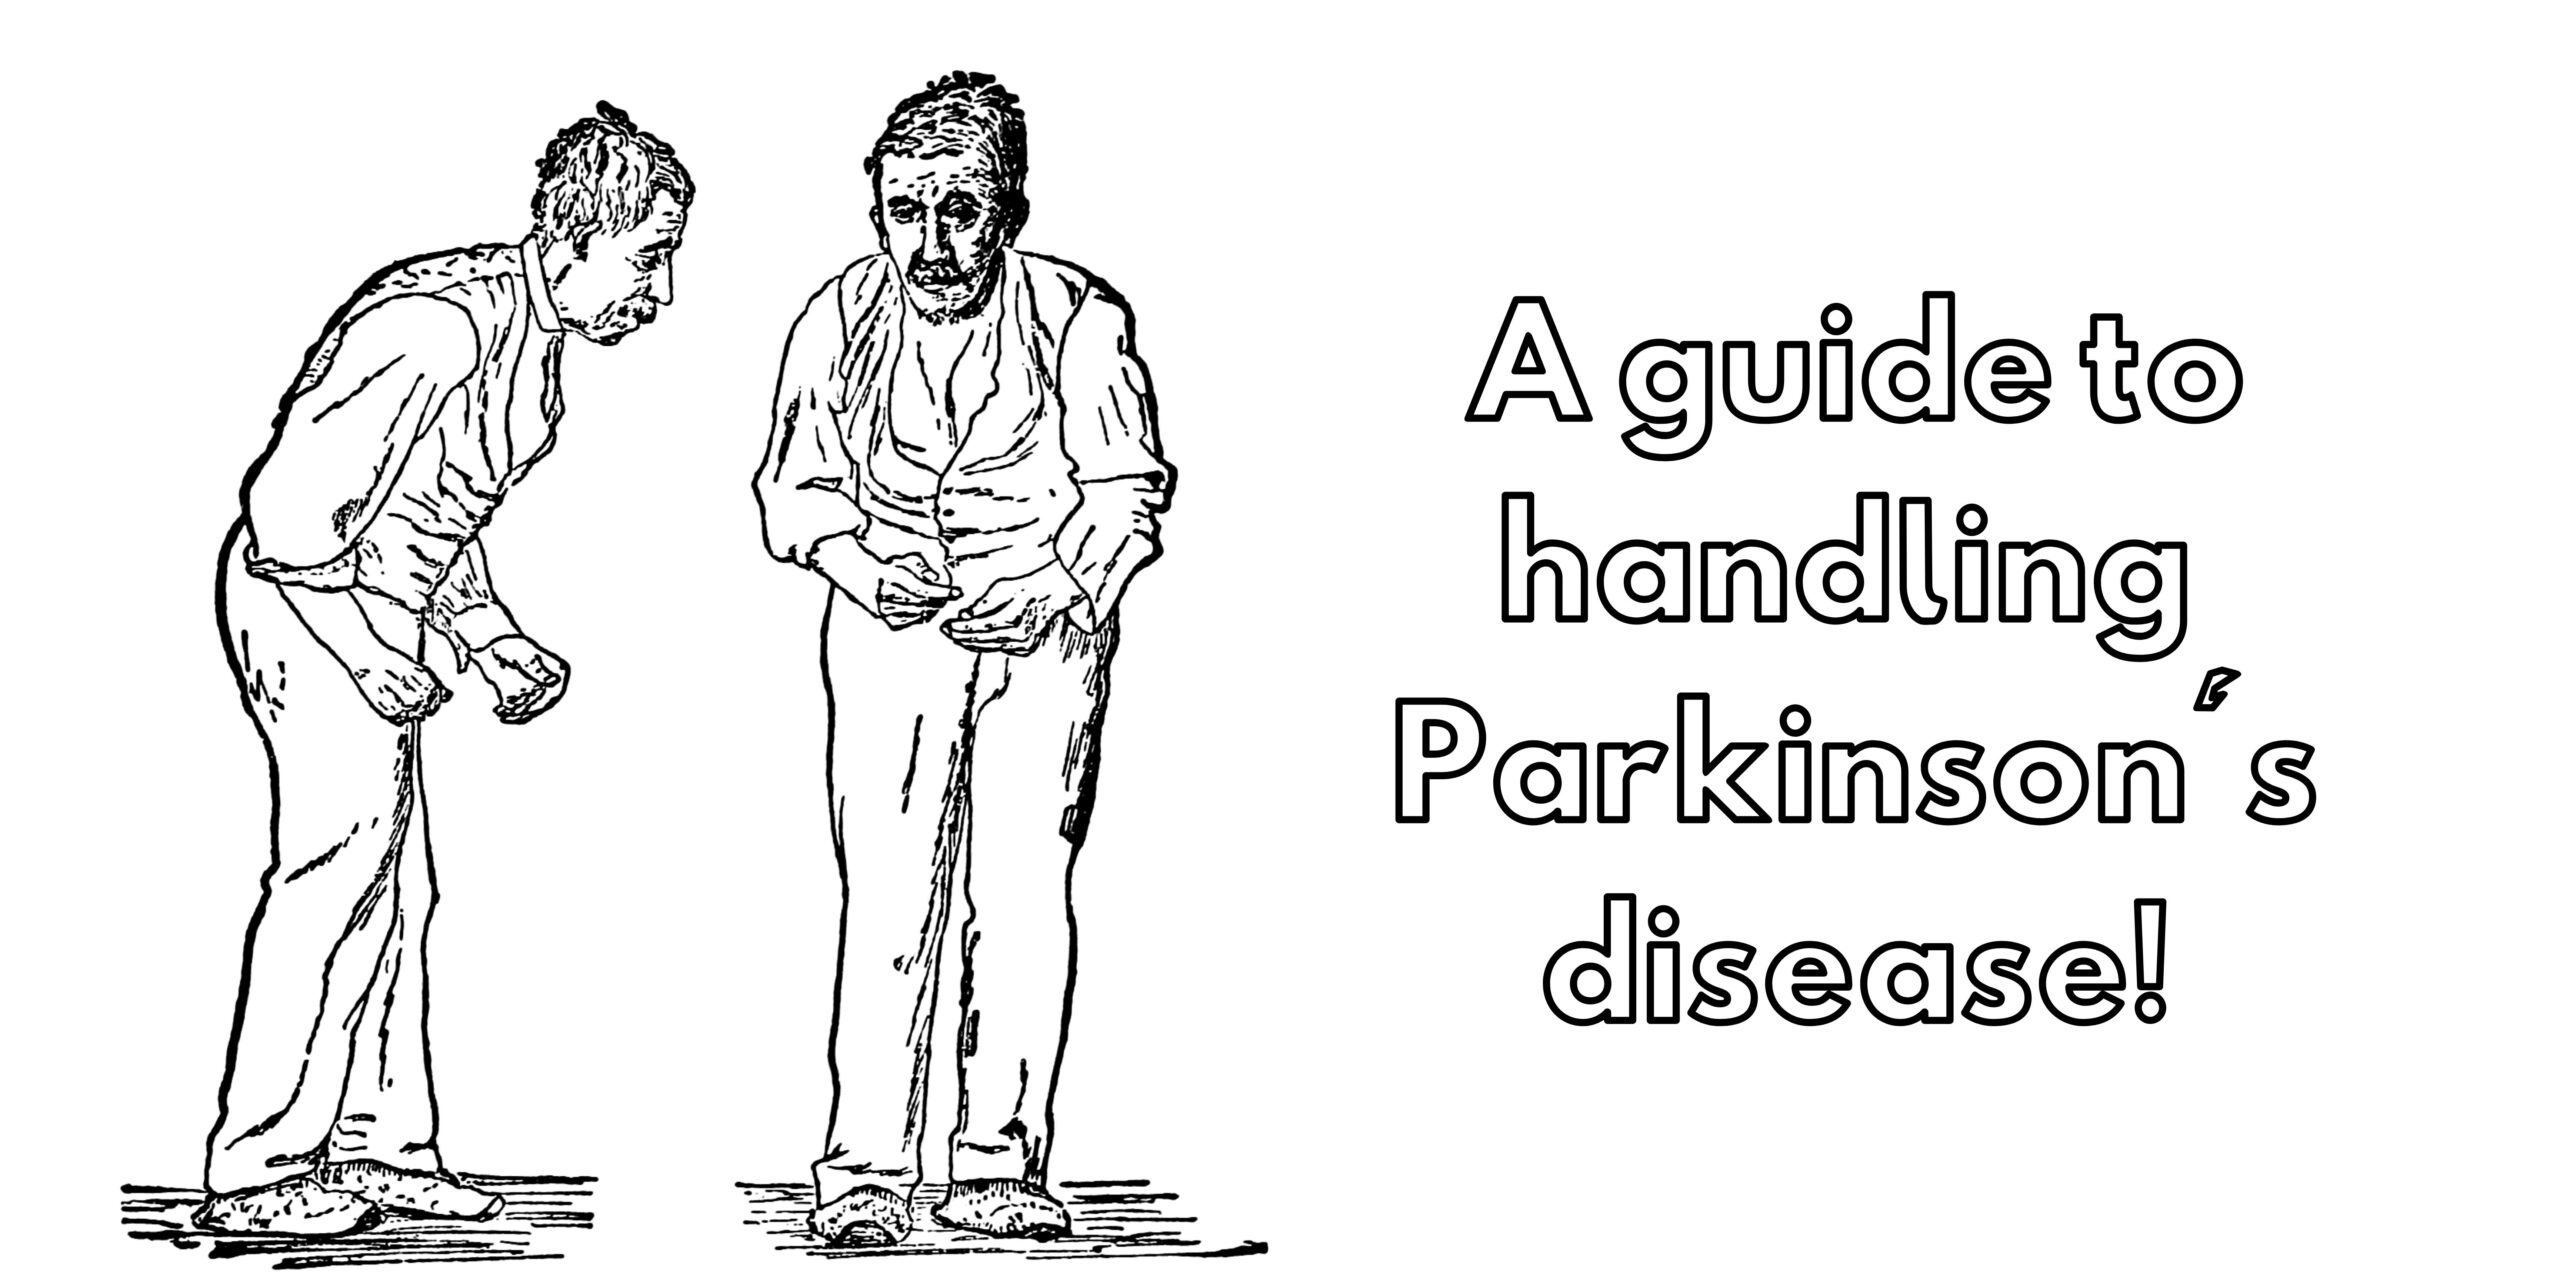 A guide to handling Parkinson’s disease!